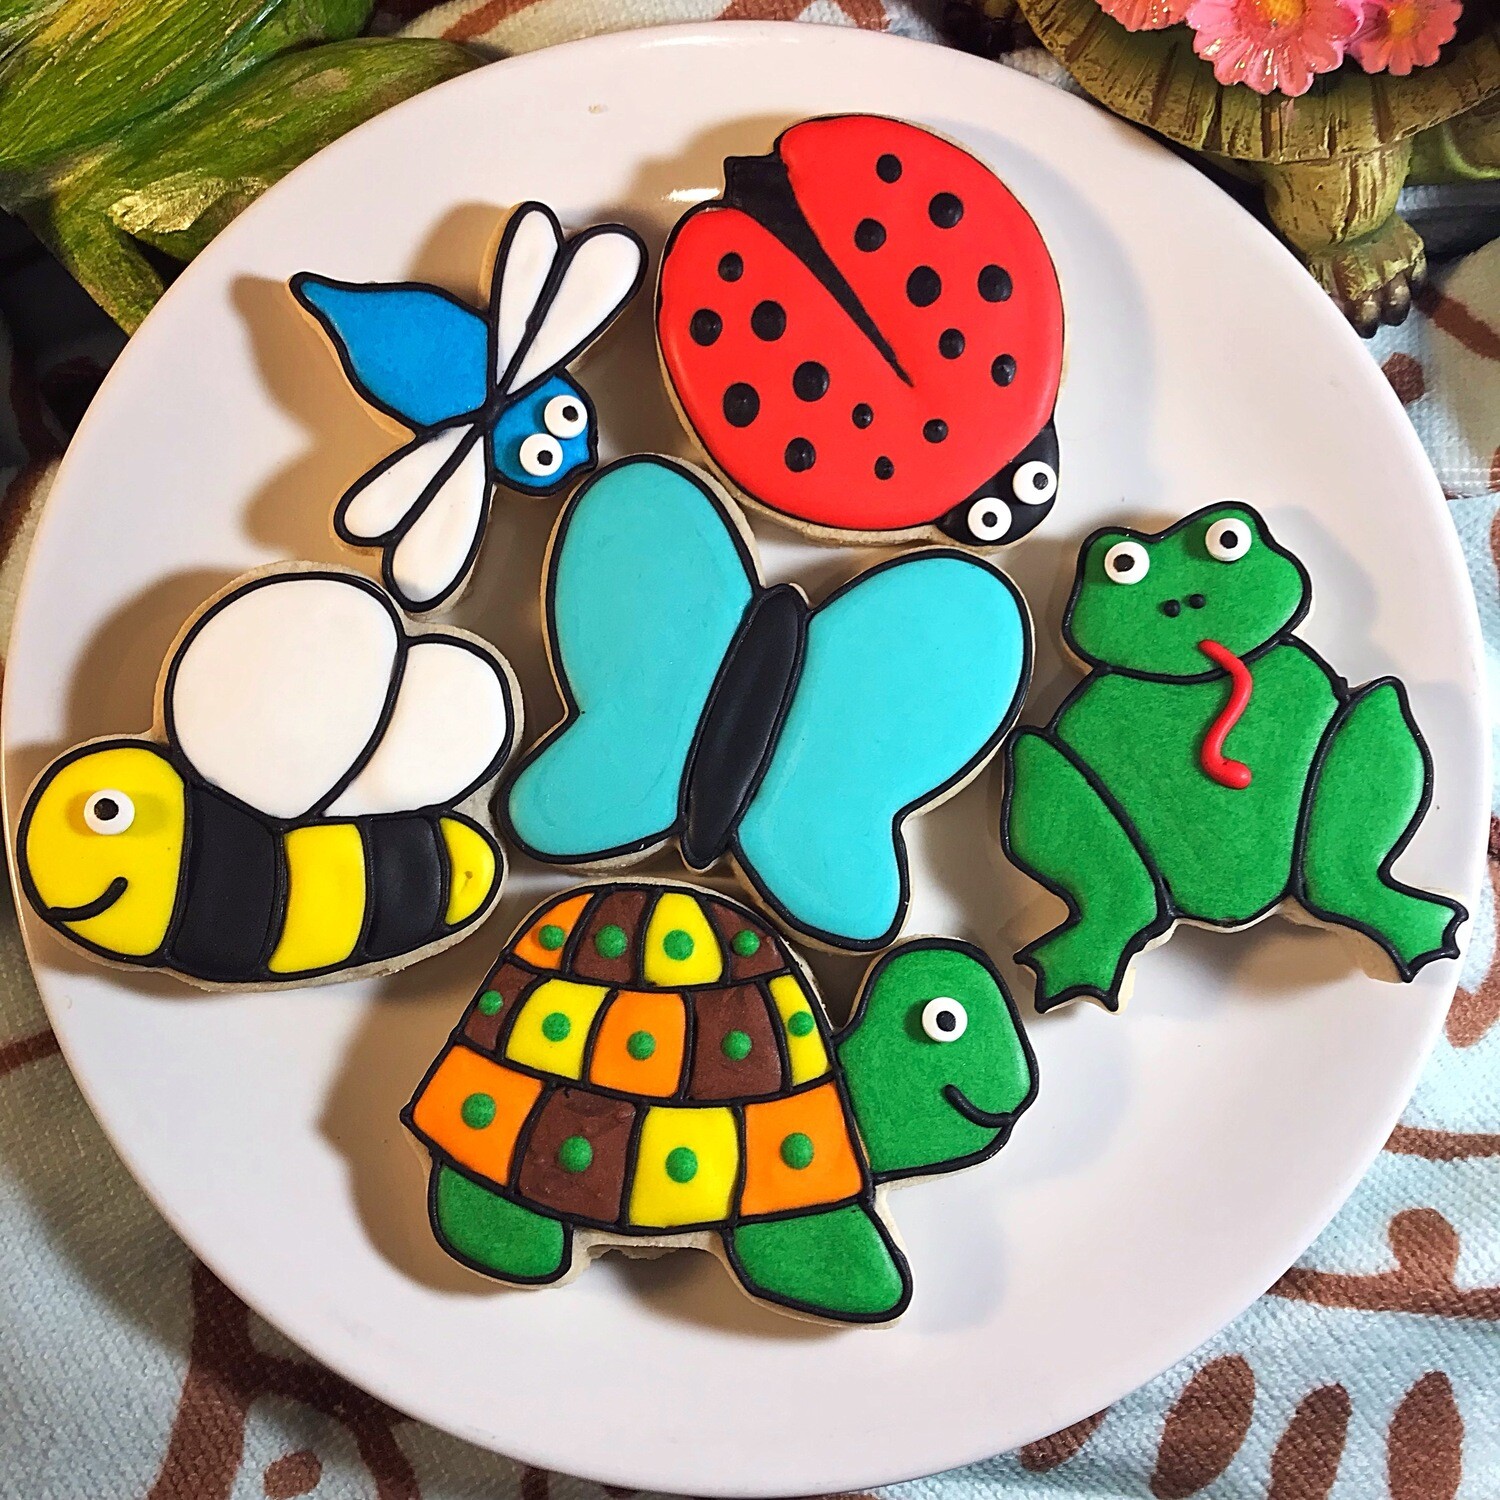 'Critters Decorating Workshop - THURSDAY, JUNE 11th at 6:30 p.m. (THE COOKIE DECORATING STUDIO)